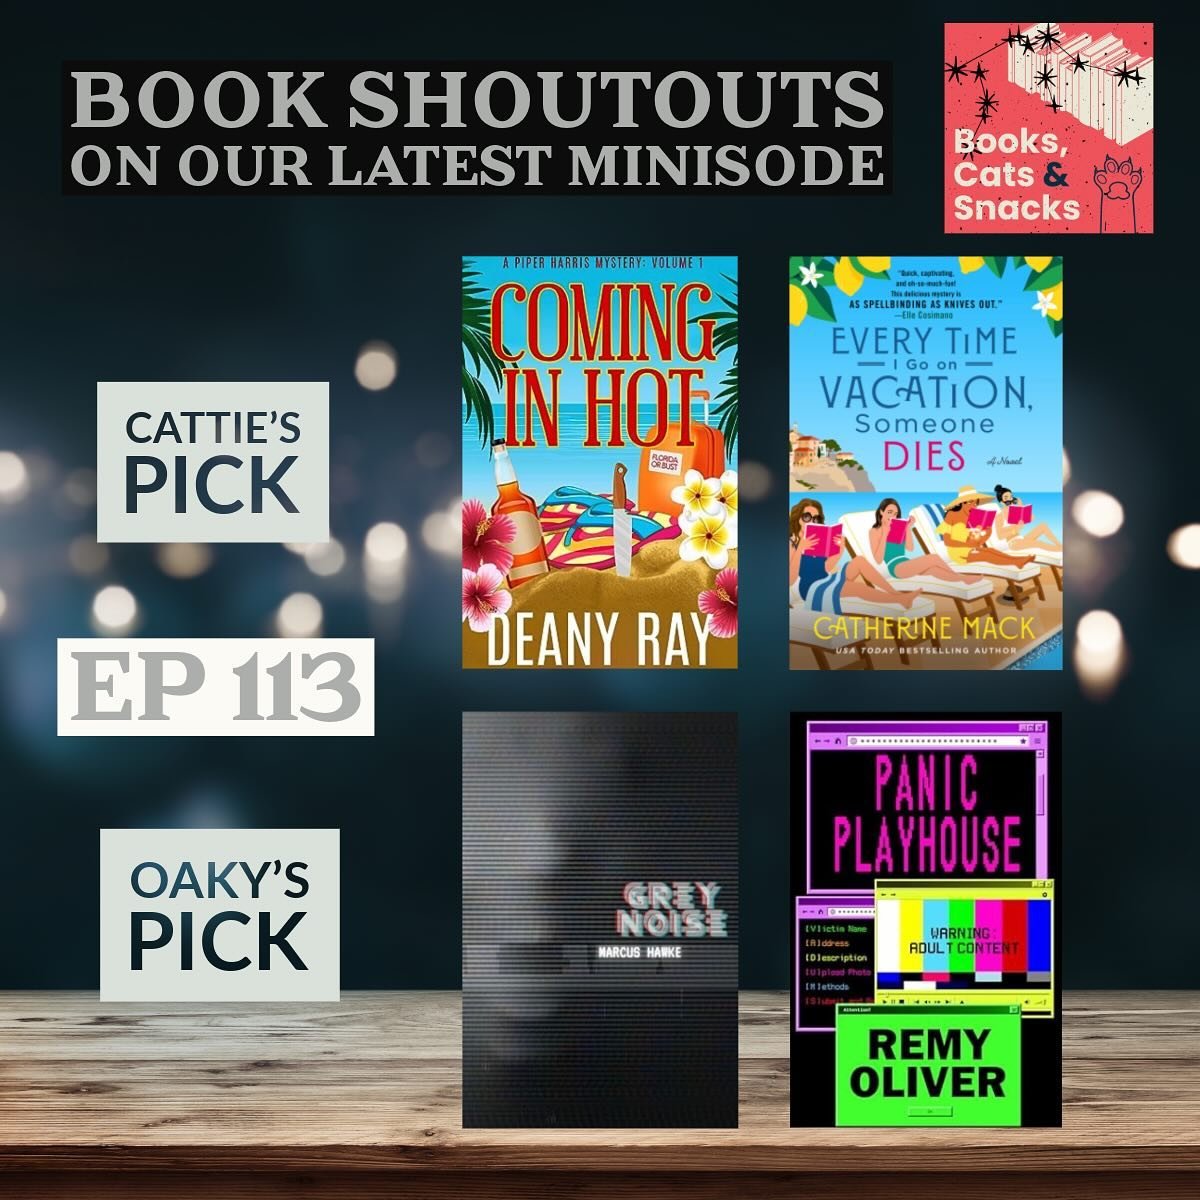 🚨 NEW EPISODE ALERT 🚨 
Yes, we did back-to-back episodes of Book Shoutouts! Check out these amazing books that have been circling our TBR lately! @cattie_naj @oakylovesbooksandtacos 

Authors featured:
Deany Ray
@catherinemckenzieauthor 
@remyolive